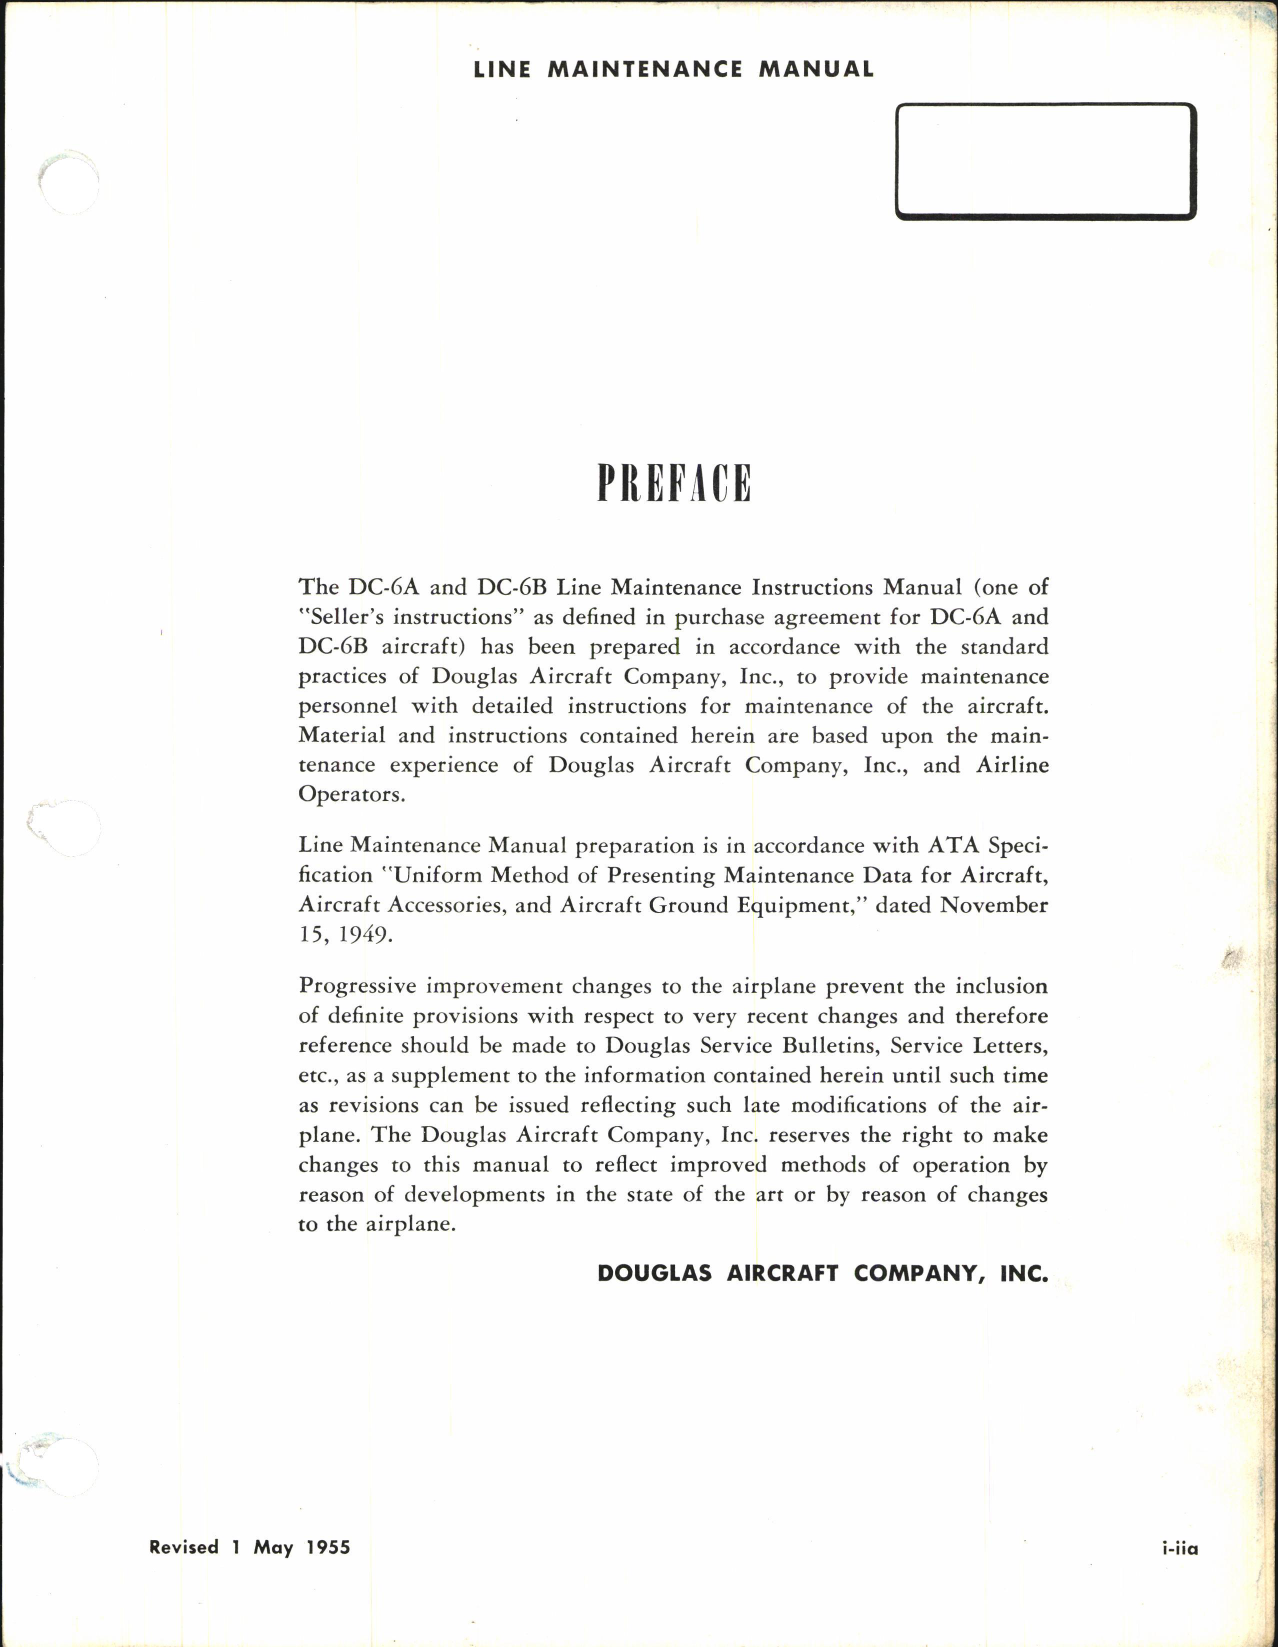 Sample page 5 from AirCorps Library document: Maintenance Manual for DC-6B 